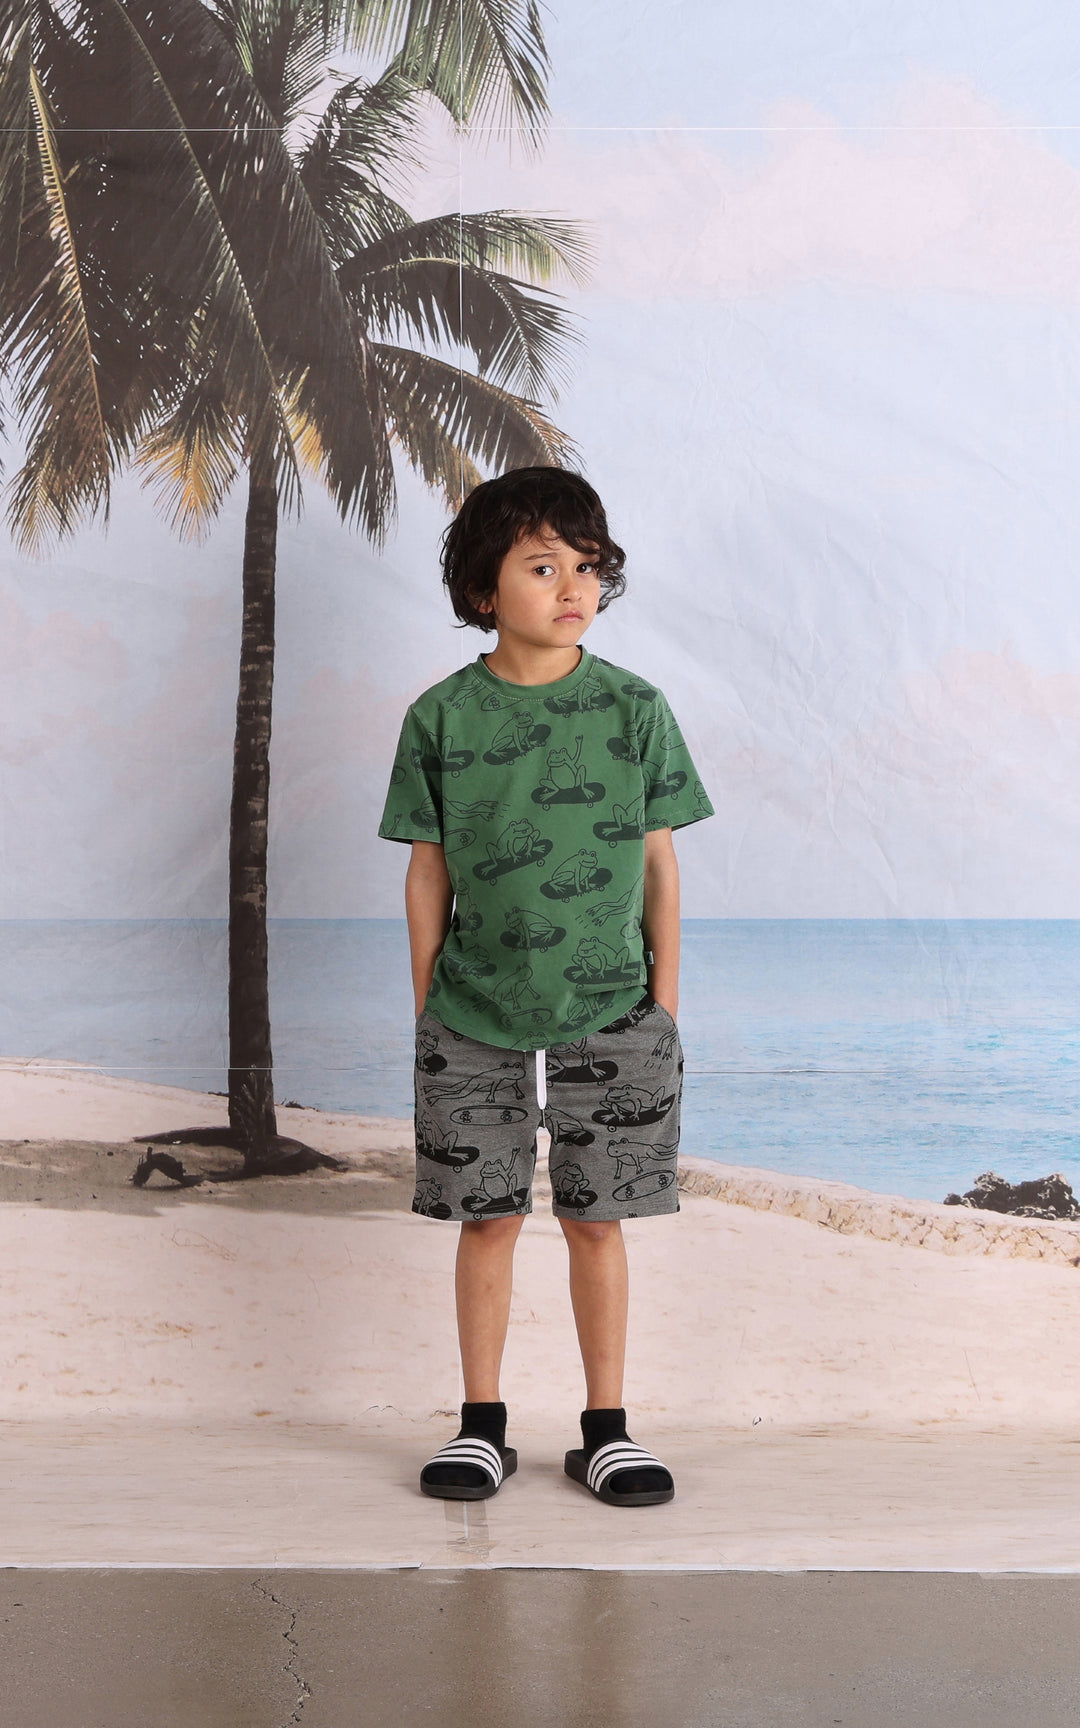 Minti Skate Frogs Short - Charcoal Marle